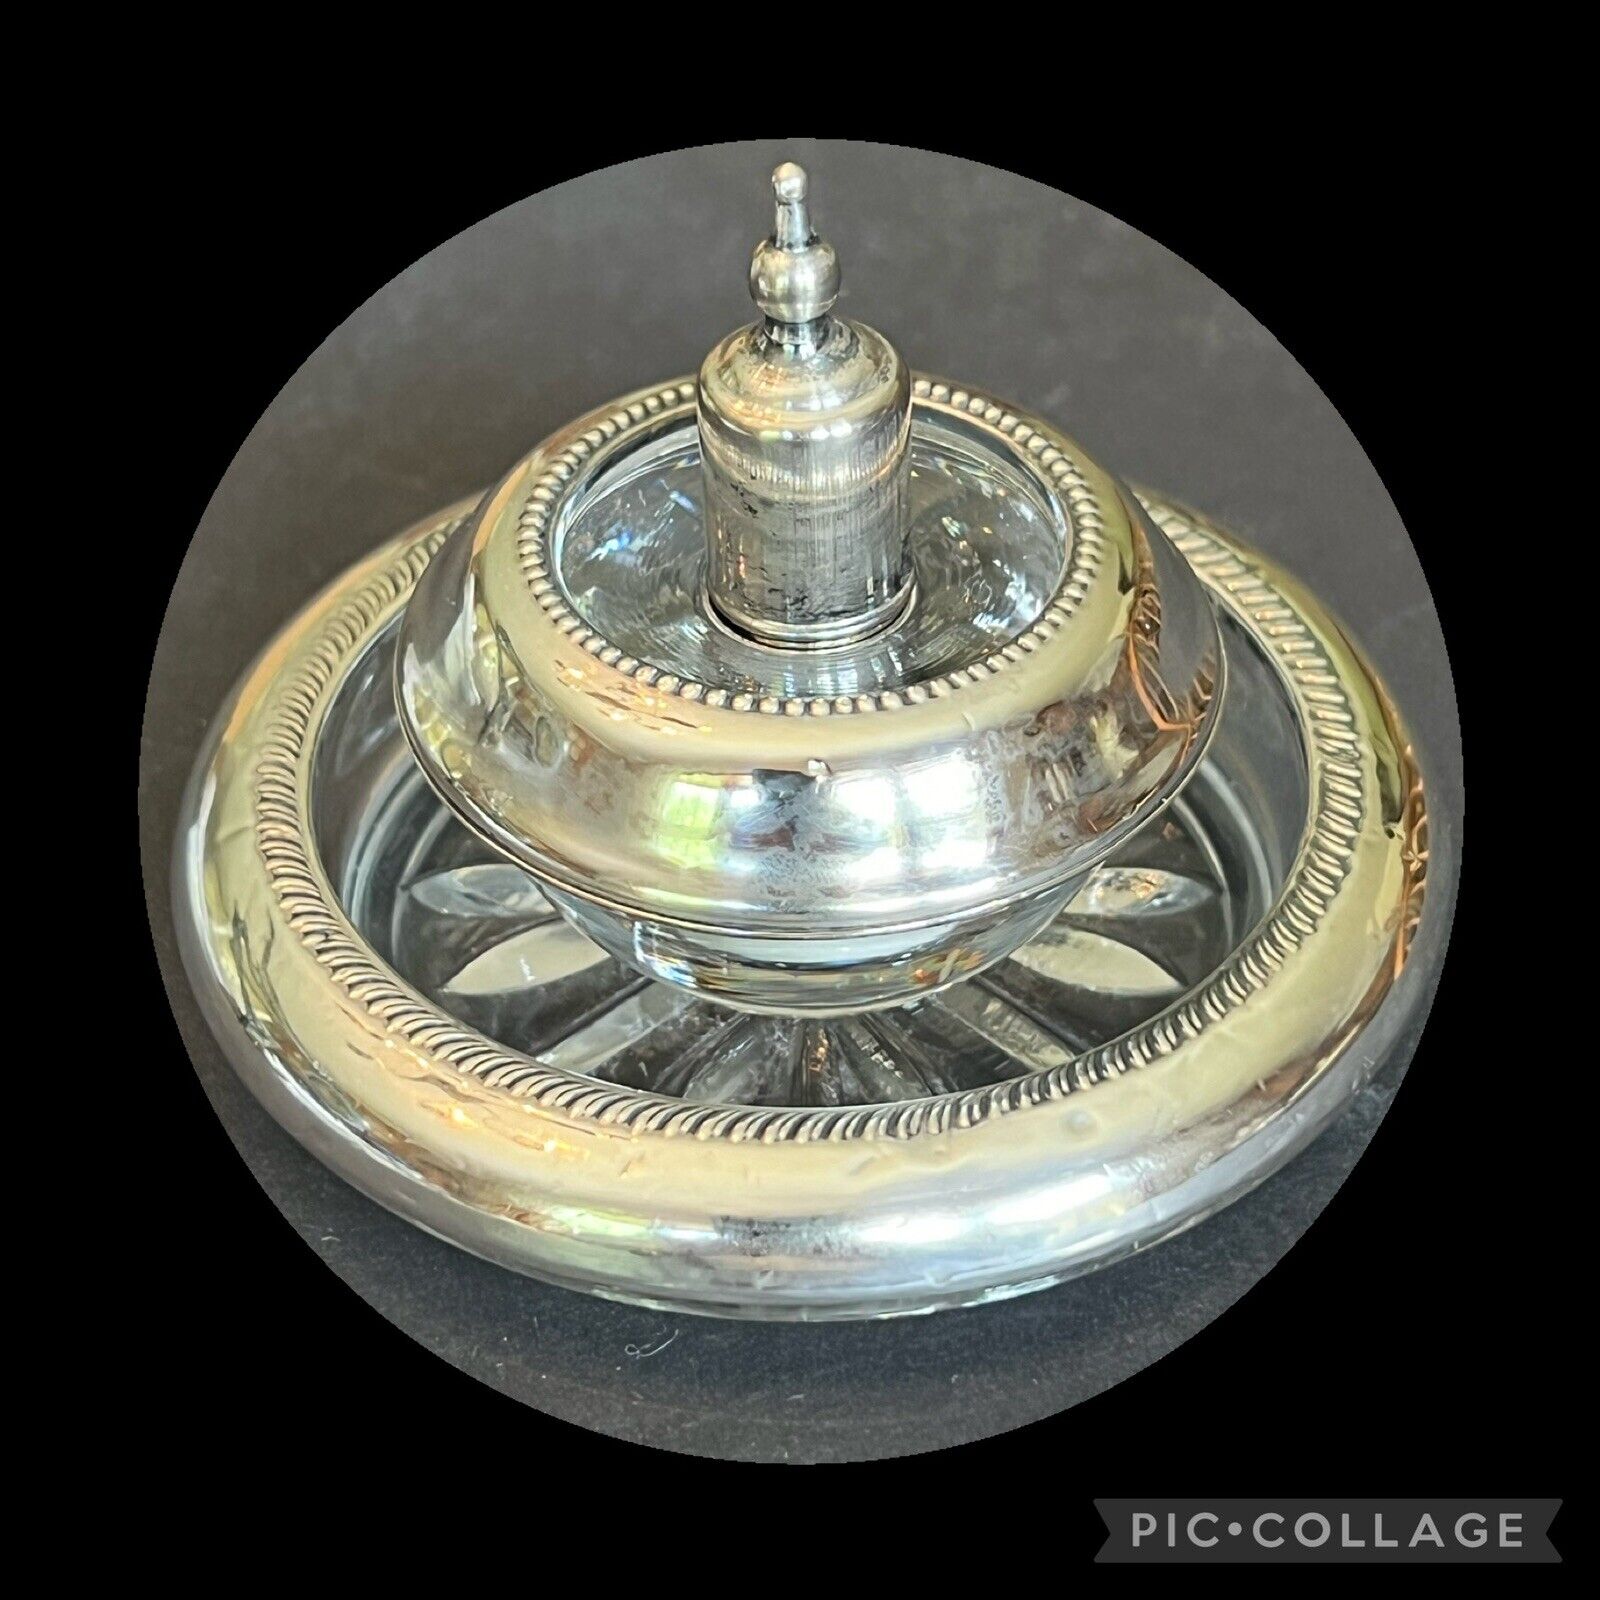 Vntg c1930s Frank M Whiting Sterling Silver&Glass Ashtray/Table Lighter w/ Cap